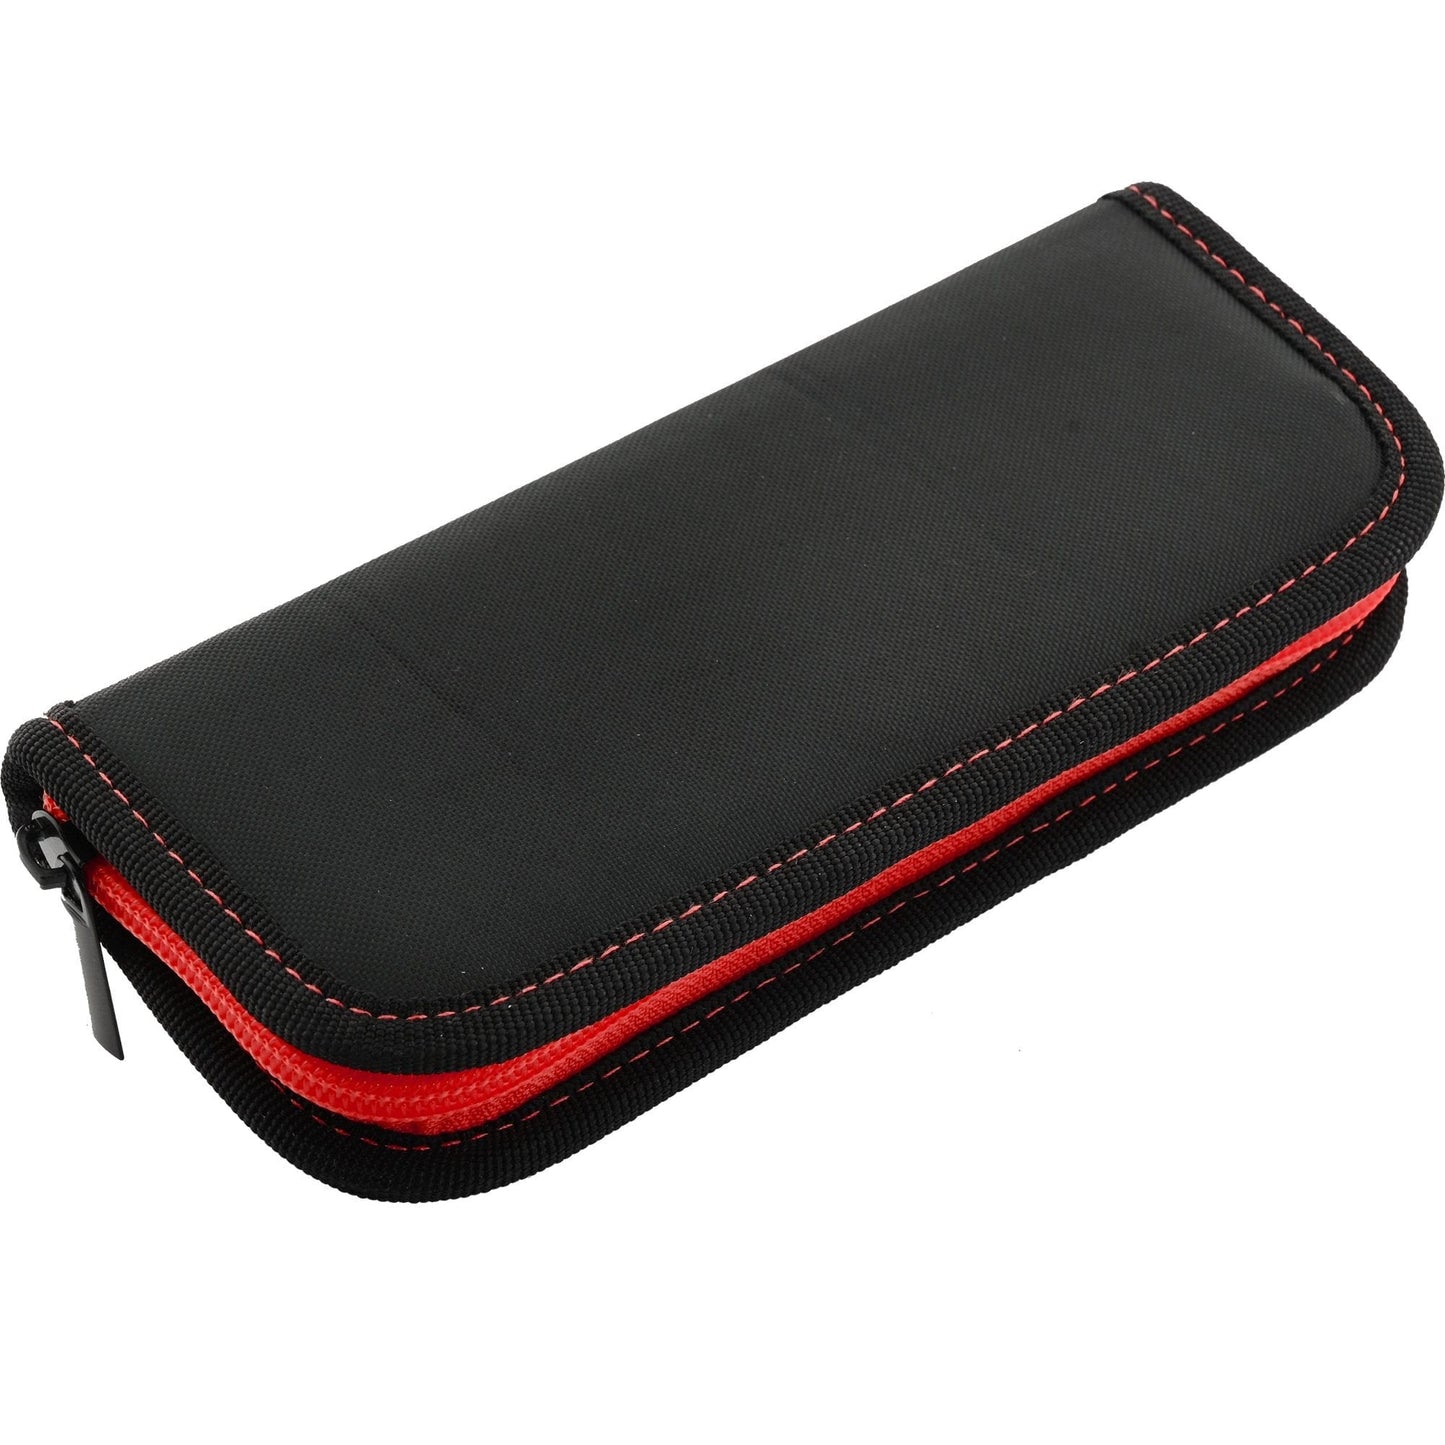 Designa Fortex Dart Case - Strong Protective Red